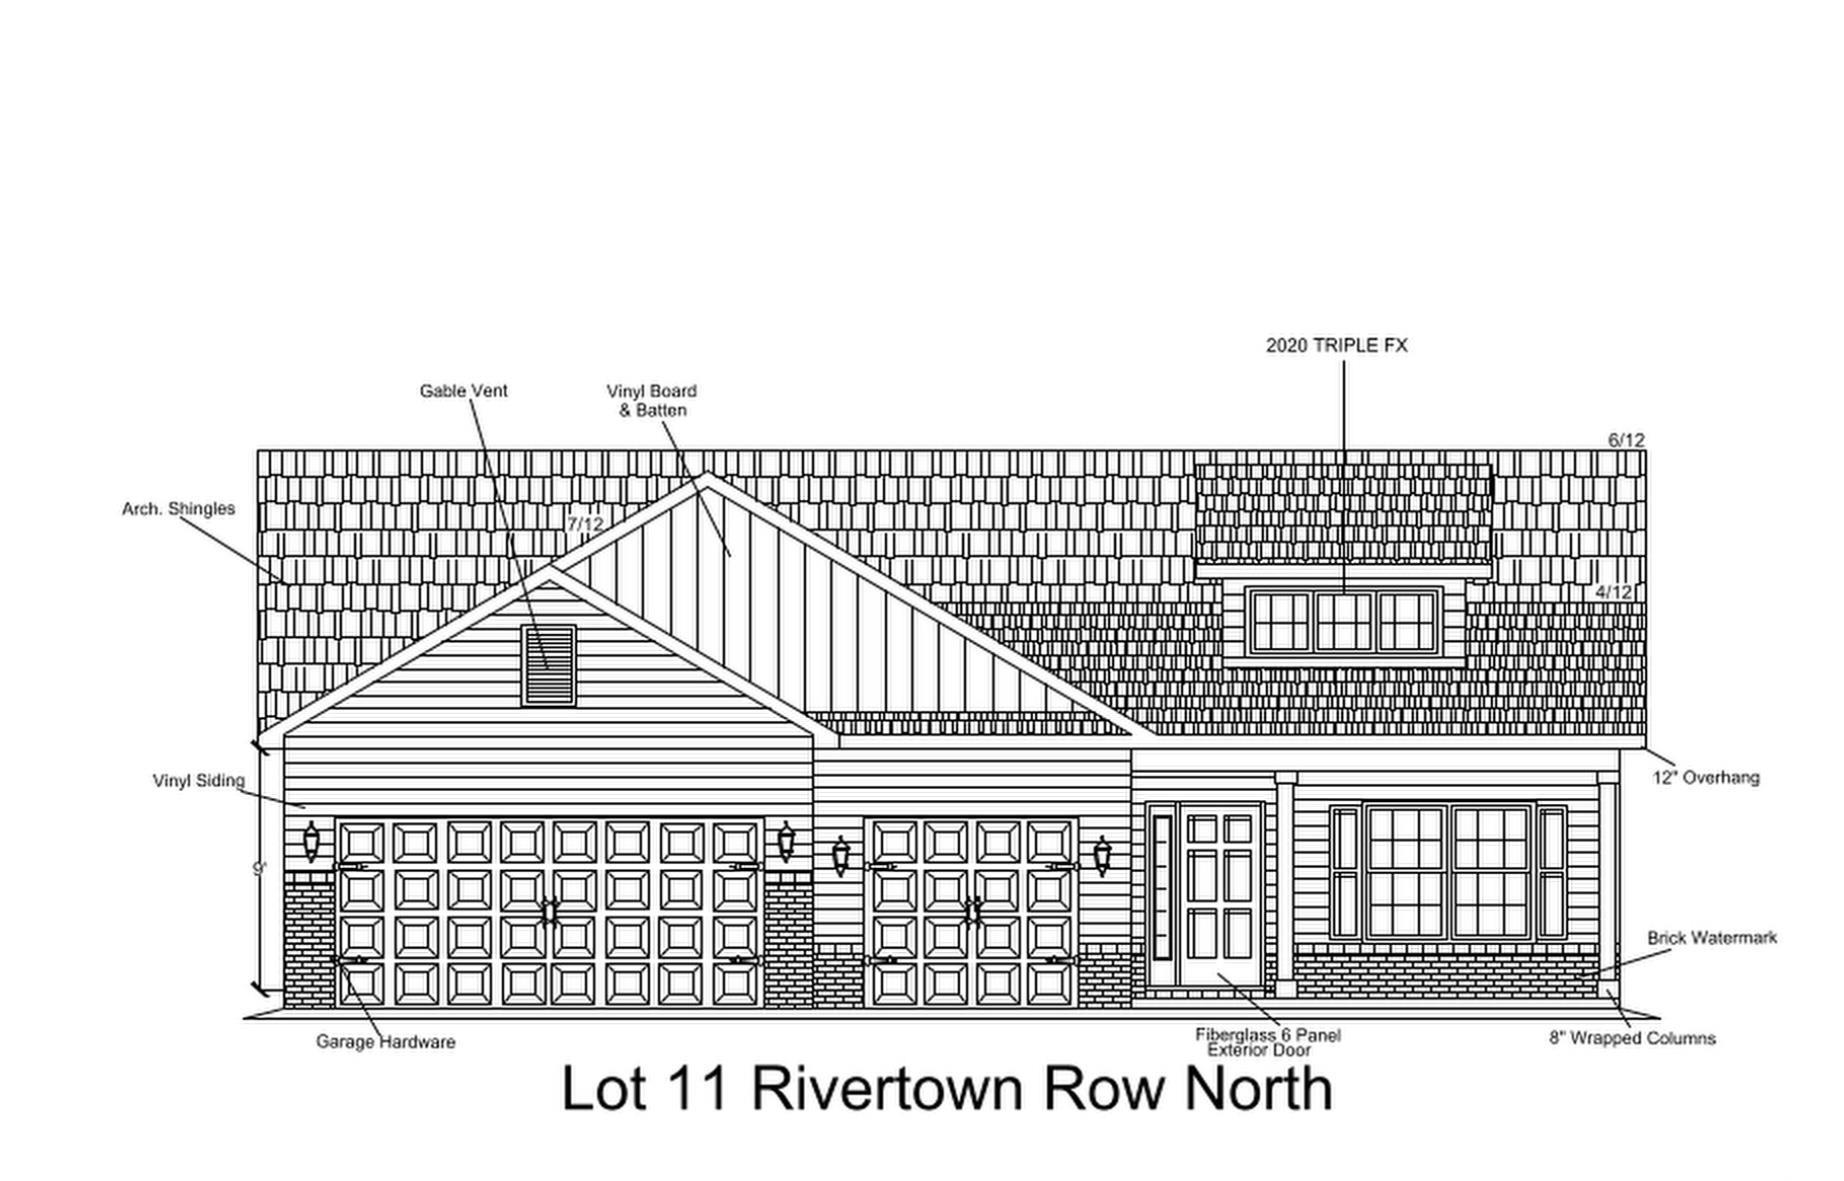 welcome to rivertown row north, the most anticipated new development in the heart of conway. enjoy the comfort of natural gas heat, cooking & tankless hot water in this 1876 sq ft buxton model with 3 car garage, that sits on a 1/4 acre lot. this 3 bedroom, 3 bath split floor plan has a large rear master suite with access to the laundry room from the master closet, vaulted great room ceilings, granite kitchen counter tops, and a kitchen bar w/ seating. the waterproof laminate plank flooring extends throughout the kitchen baths  and living areas. the third bedroom is an upstairs suite with its own full bath. there is also a 3 car painted and trimmed garage w/ drop down attic access, laundry room pantry,  covered front porch, and a covered rear porch with an additional concrete patio that doubles your outdoor entertainment space. all homes in rivertown row north feature wider than average lots, open floor plans, 9' ceilings, painted garage interiors, gutters, fully cased windows, gaf high performance architectural shingles, 12" roof overhangs, aristokraft stone gray painted birch shaker cabinets, rinnai tankless water heater, frigidaire stainless appliances, and many other upgraded architectural details. the neighborhood features sidewalks, street lighting and a community pool with pavilion. building lifestyles for over 35 years, we remain the premier homebuilder of new residential communities and custom homes in the grand strand and surrounding areas. we are three-time winners of the best home builder award from wmbf news best of the grand strand. in 2023, we were also voted best residential real estate developer in the myrtle beach herald reader’s choice awards. we began and remain in the grand strand, and we want you to experience the local pride we build today and every day in horry and georgetown counties. all pics are not from actual home. pics are from a similar floor plan. actual colors, feature and upgrades will be different.